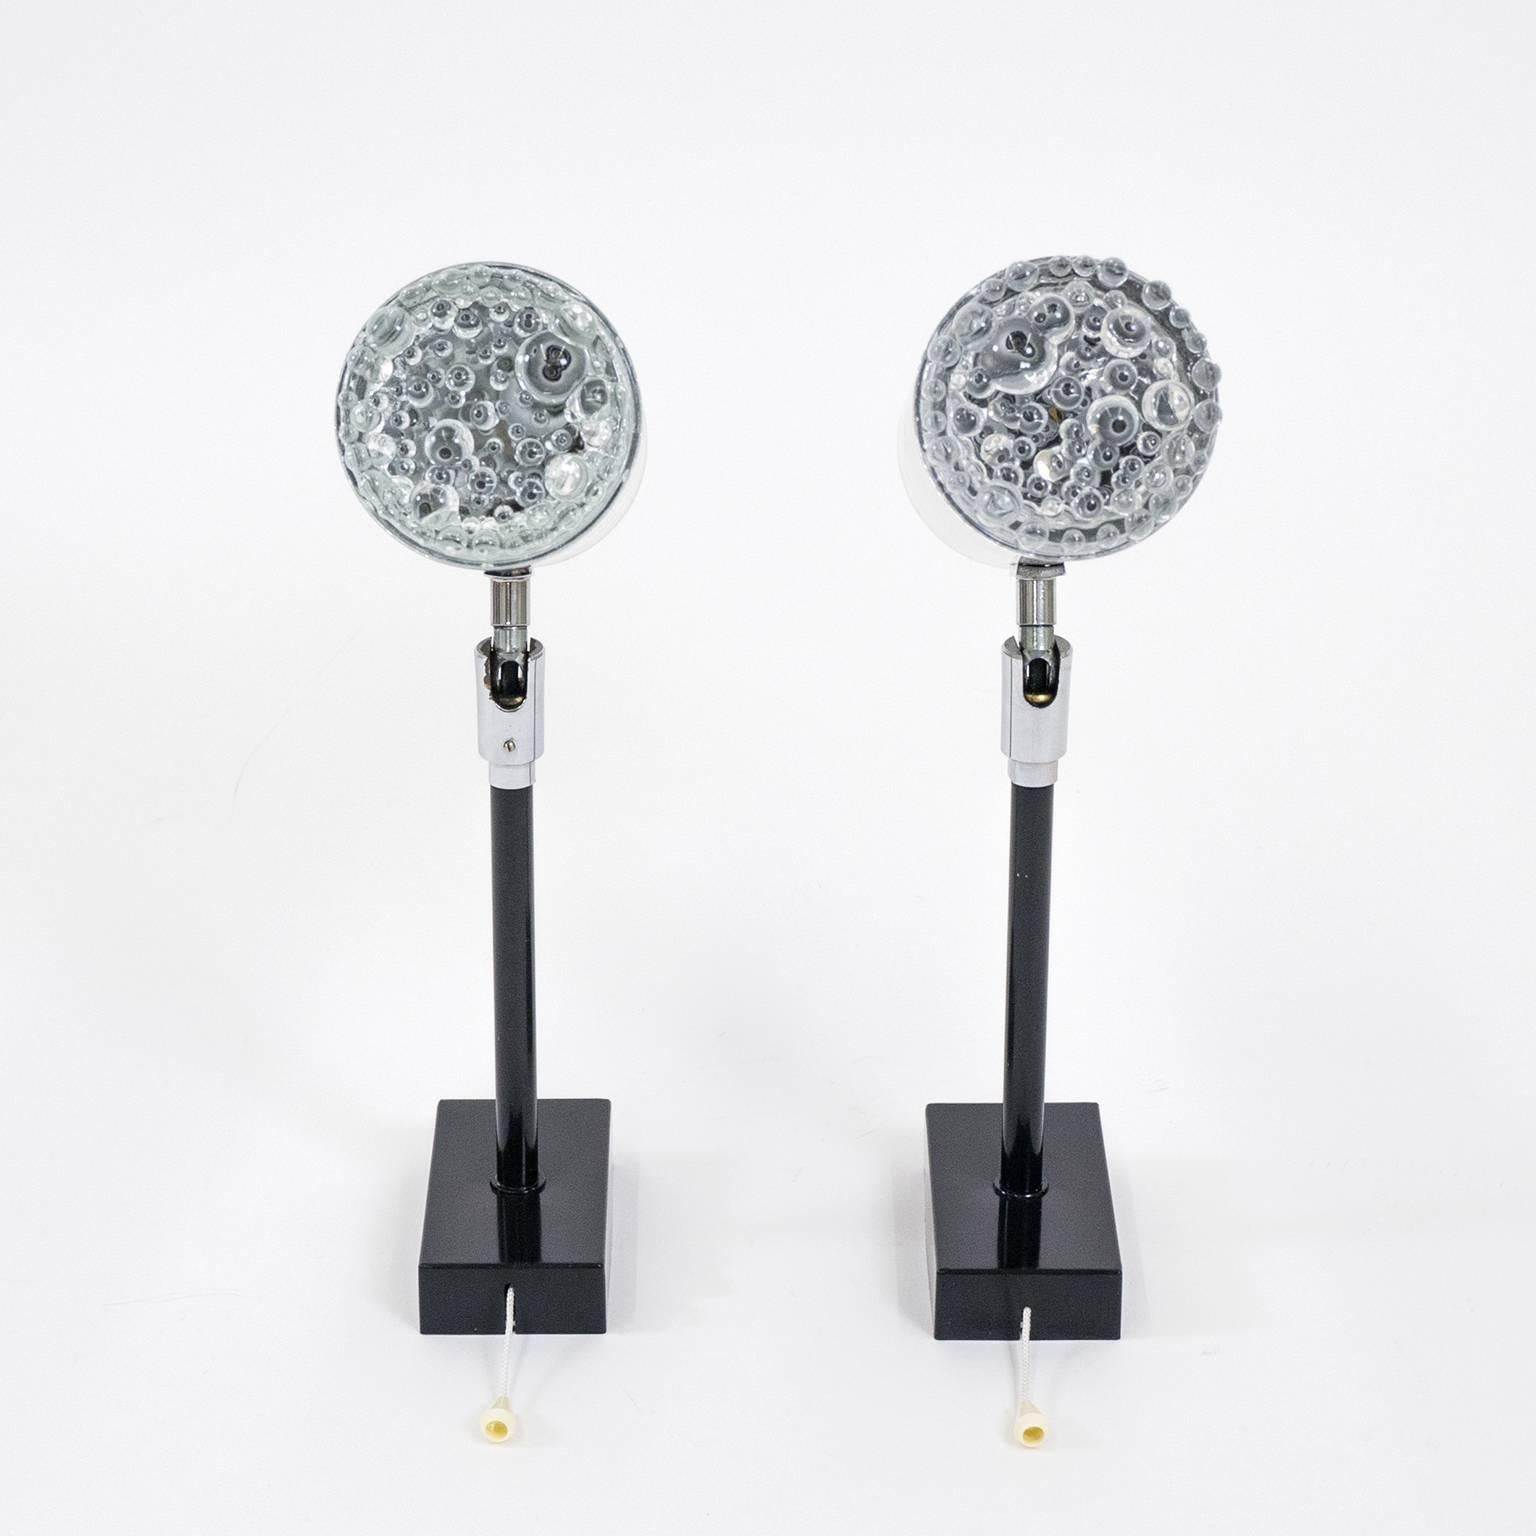 Stylish pair of large brushed aluminium and bubble glass wall lights (model W308) by Staff, 1970s. The large brushed aluminium body is attached to a black lacquered brass stem and can be rotated 360º and pivoted to hold virtually any position. Since